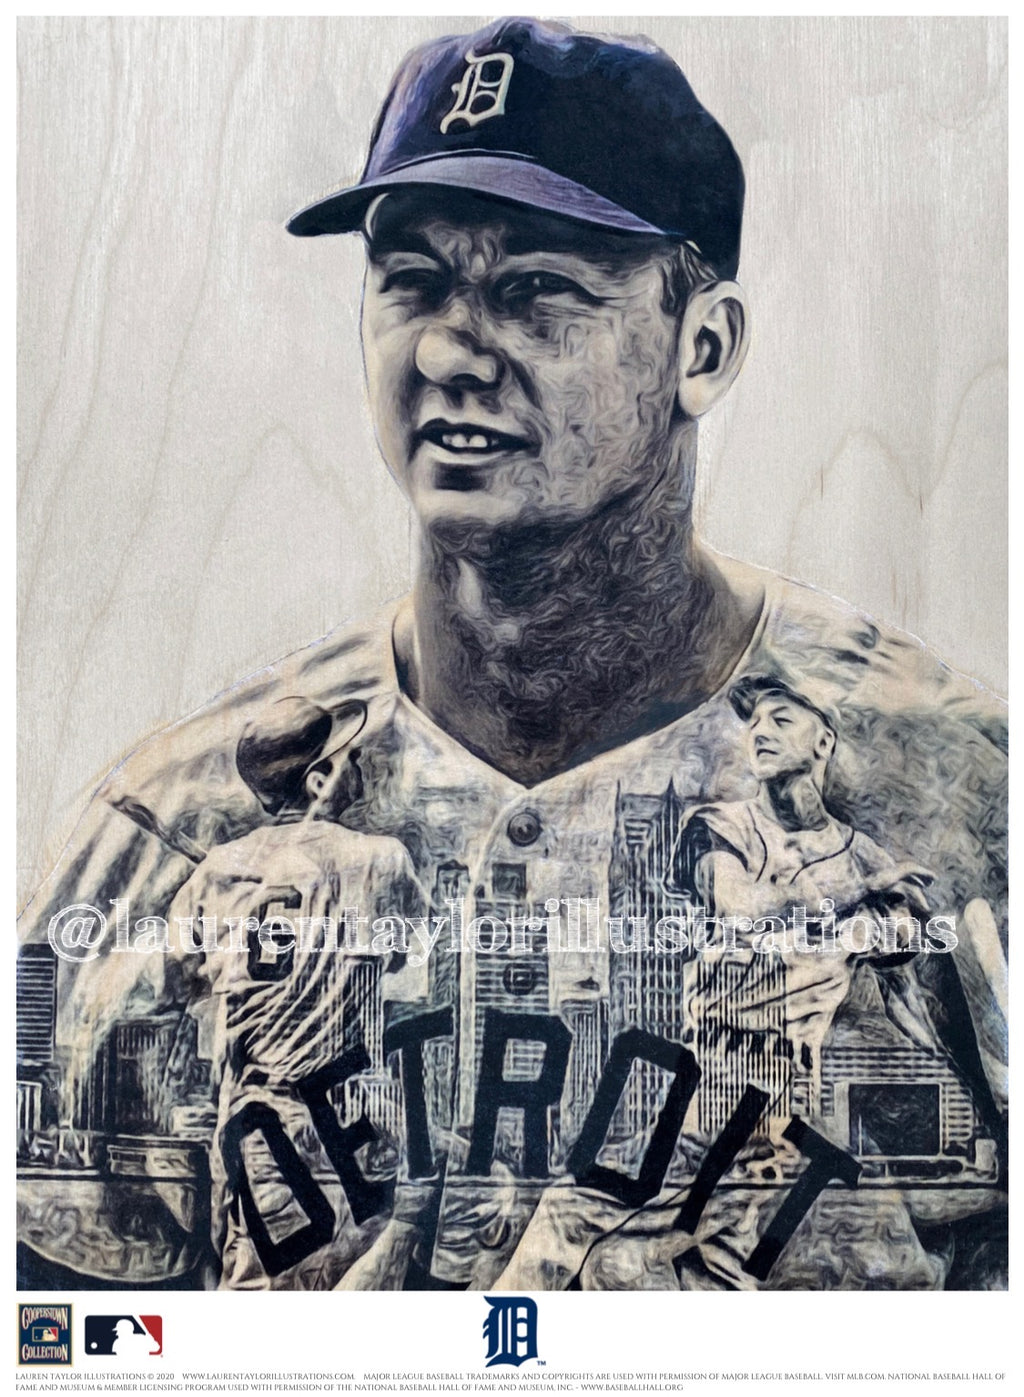 "Mr. Tiger" (Al Kaline) Detroit Tigers - Officially Licensed MLB Cooperstown Collection Print - Limited Release